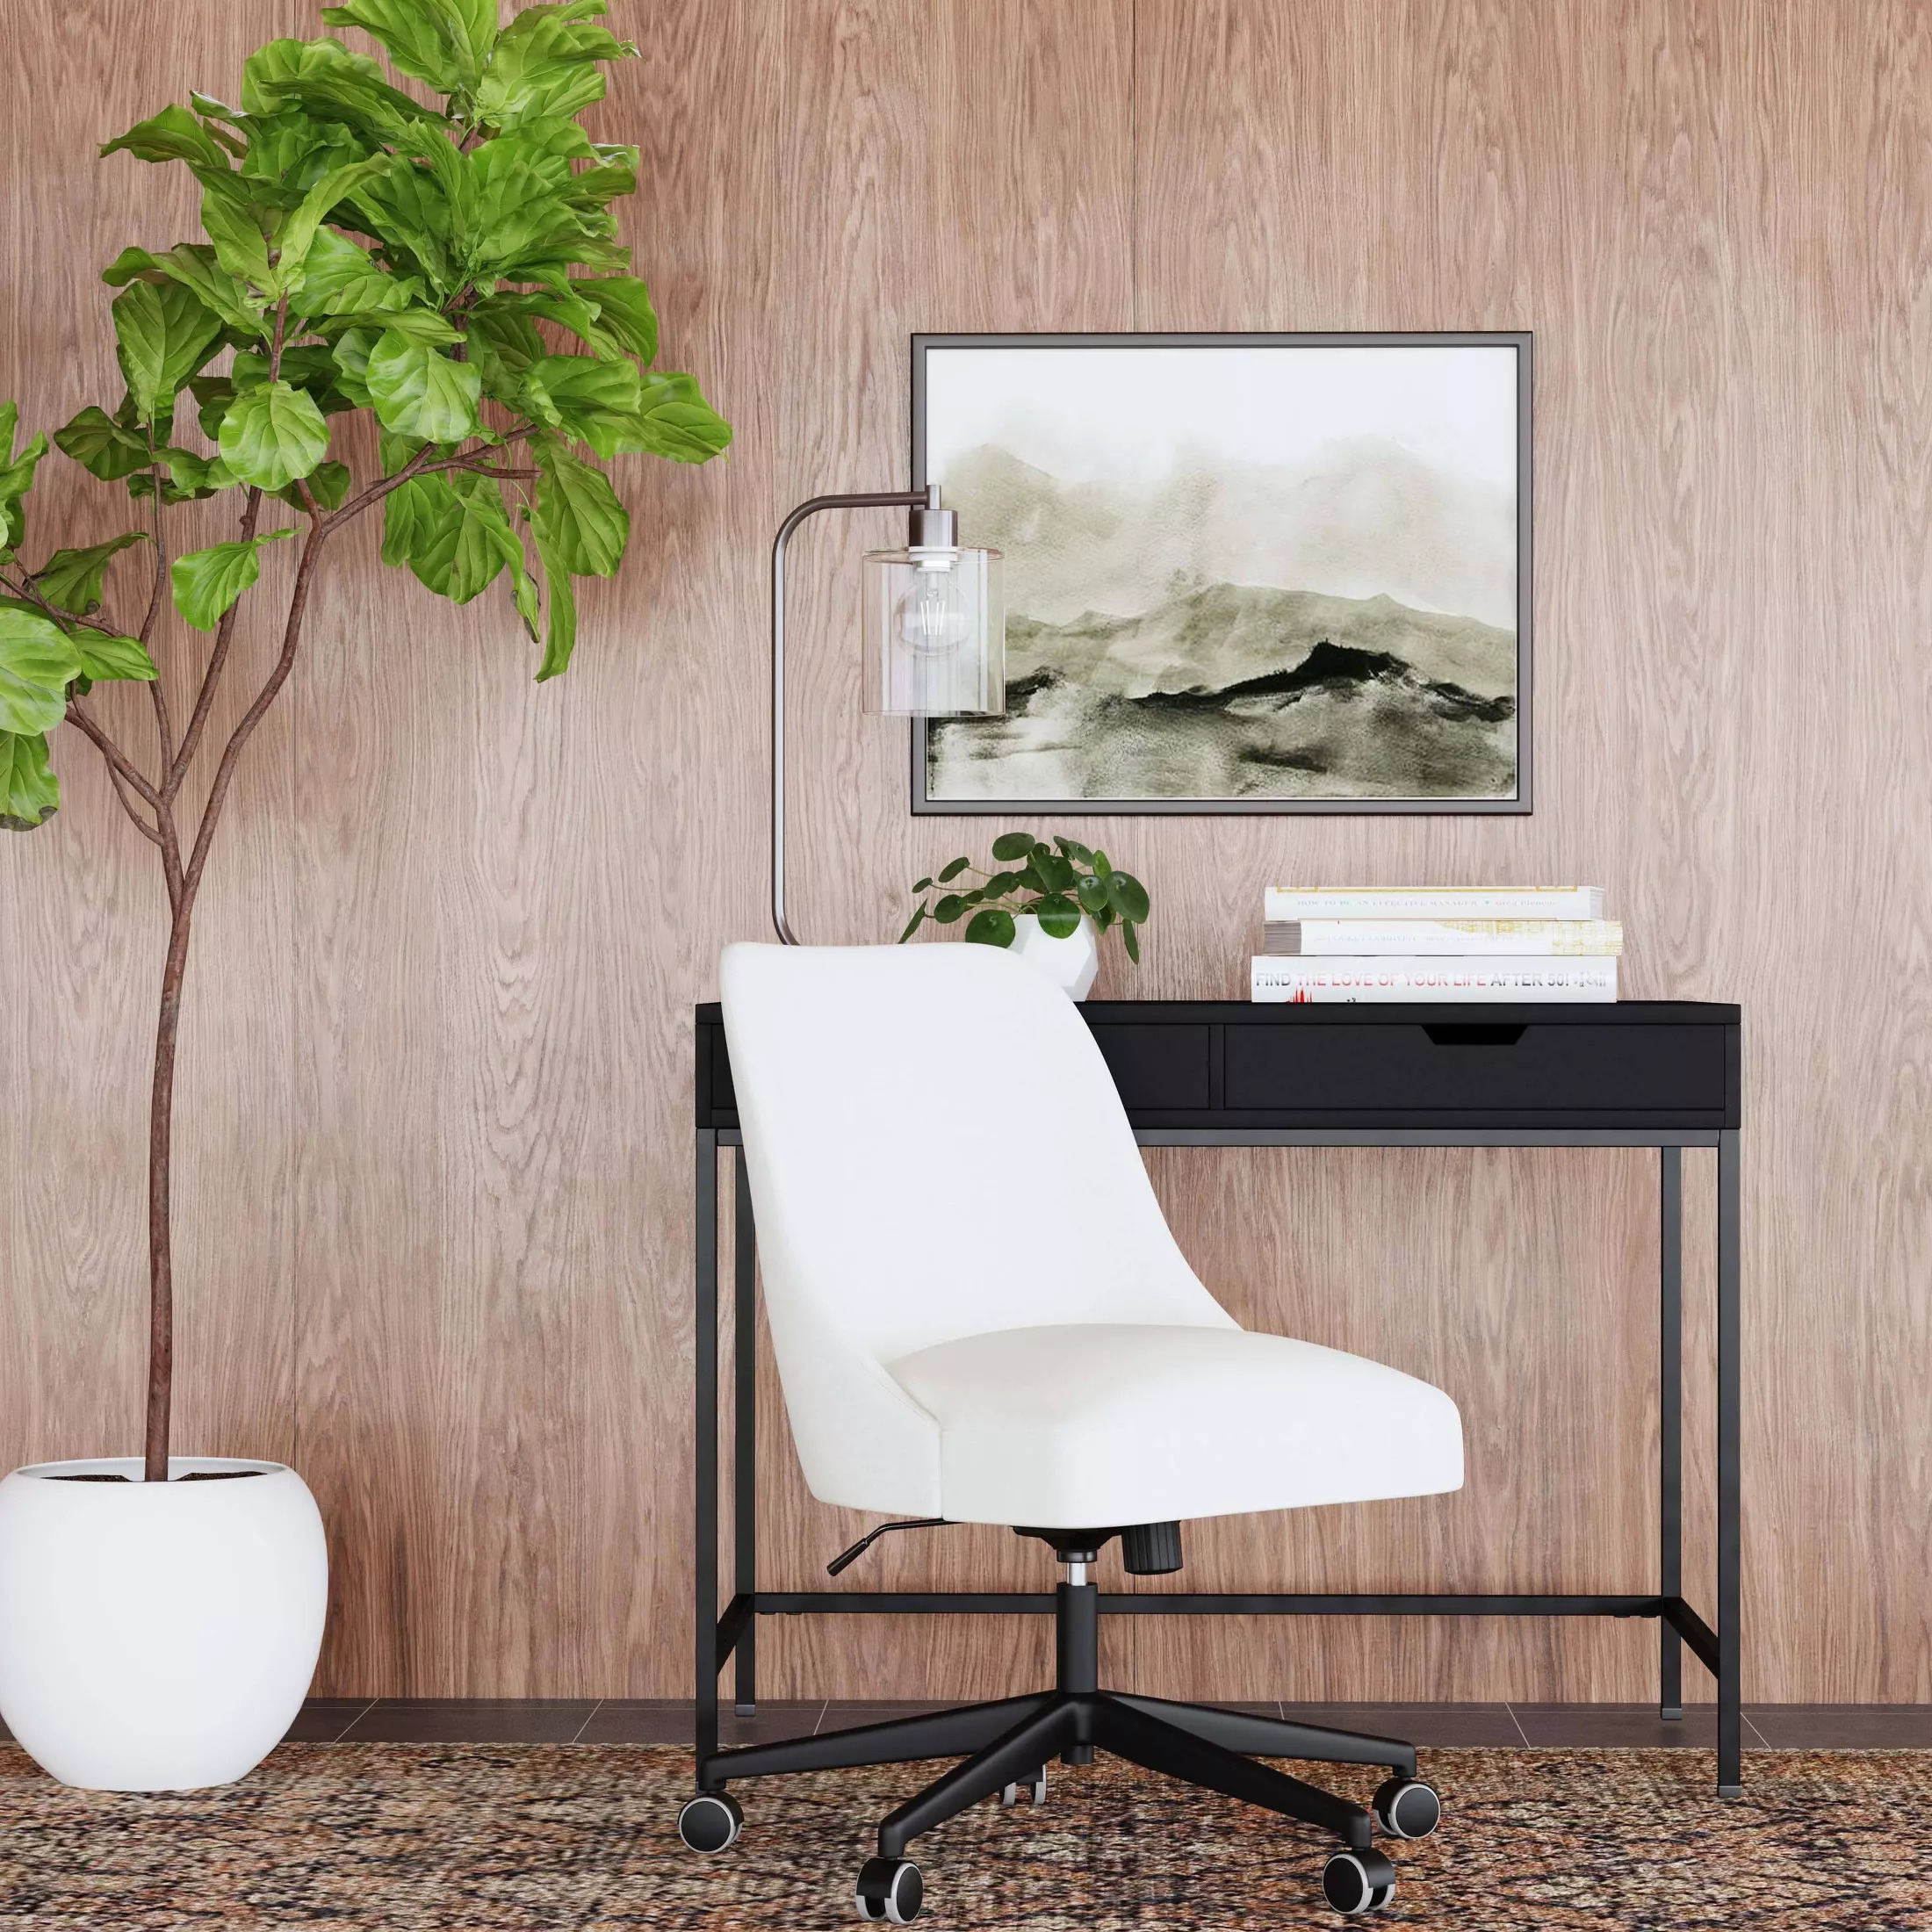 The upholstered armless office chair with a rolling five-wheel base